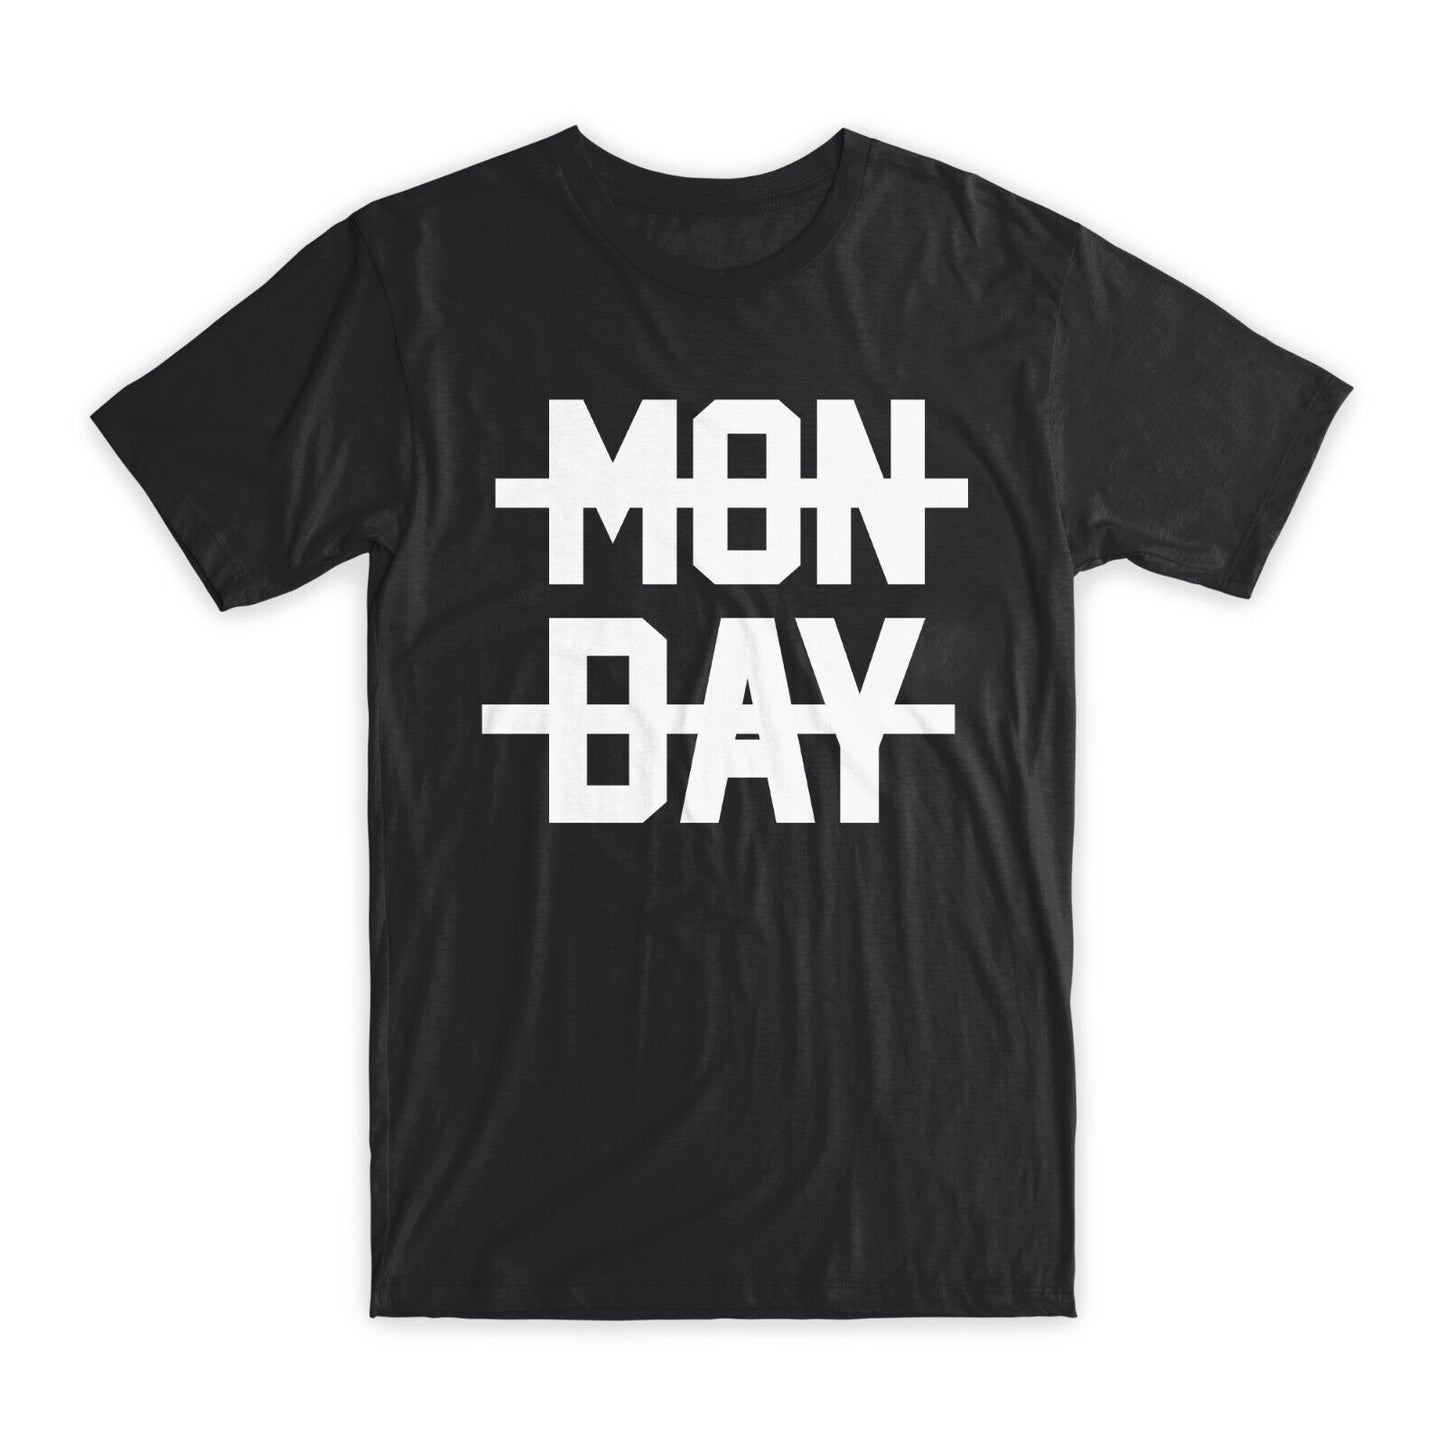 Mon Day Printed T-Shirt Premium Soft Cotton Crew Neck Funny Tee Novelty Gift NEW